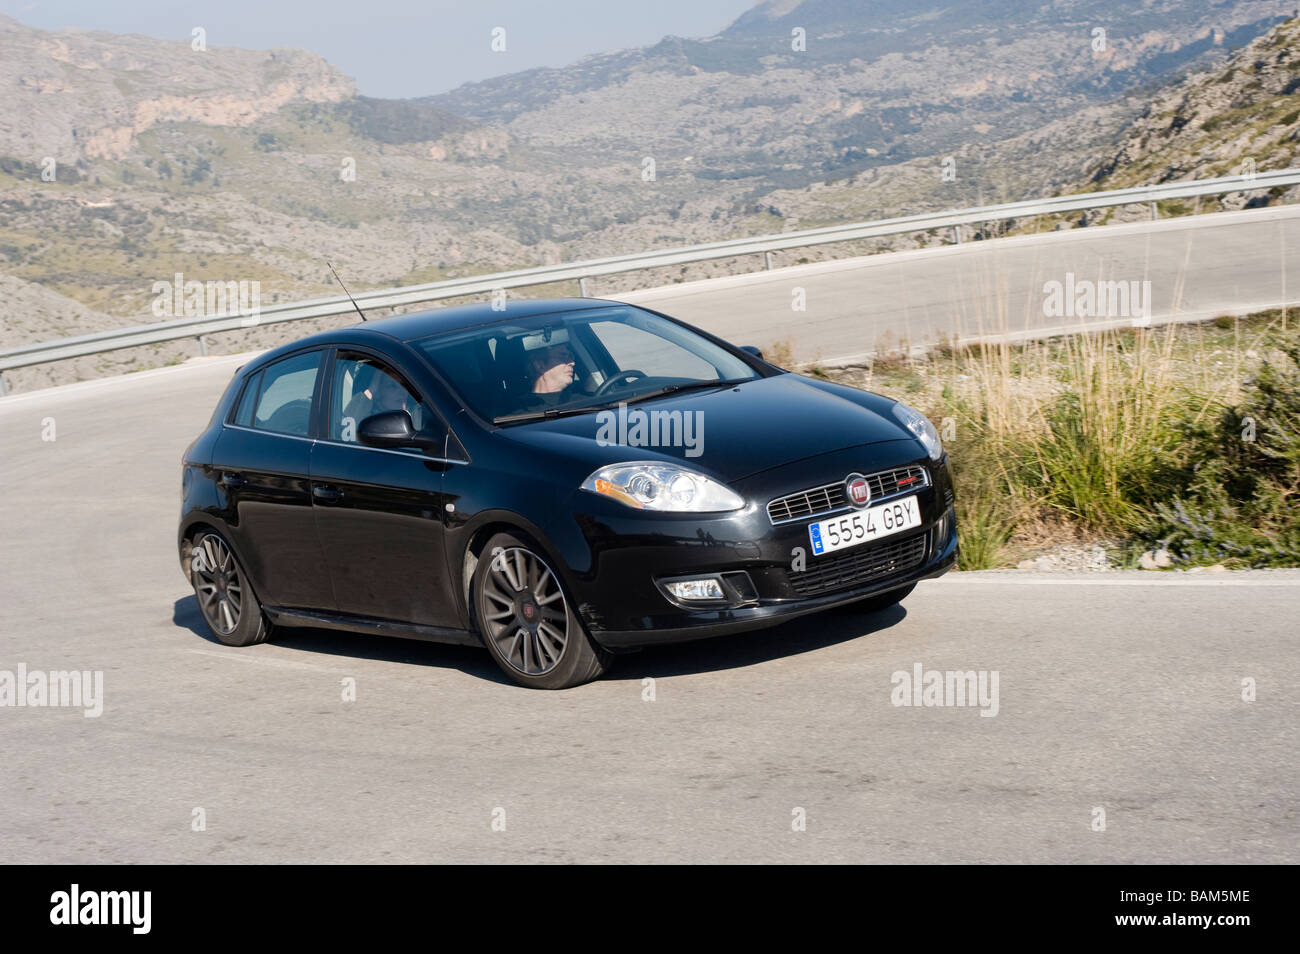 Black Fiat Bravo Multijet car being driven around a bend on a road in Spain Stock Photo